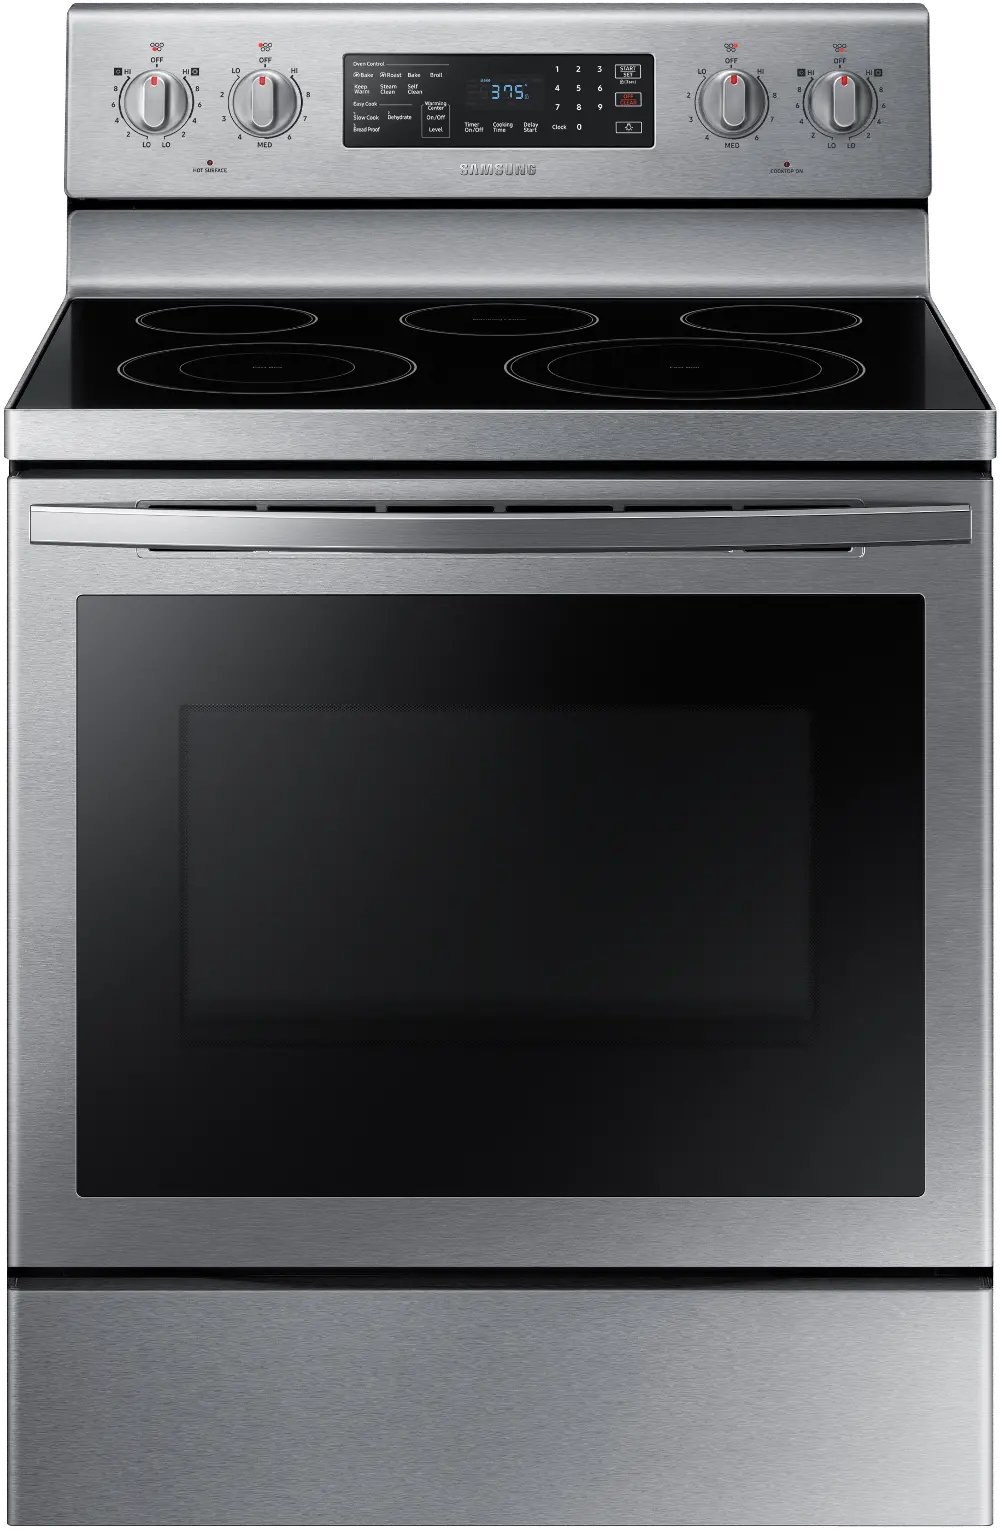 NE59T7511SS Samsung 30 Inch Electric Range with Convection and Air Fry - 5.9 cu. ft. Stainless Steel-1